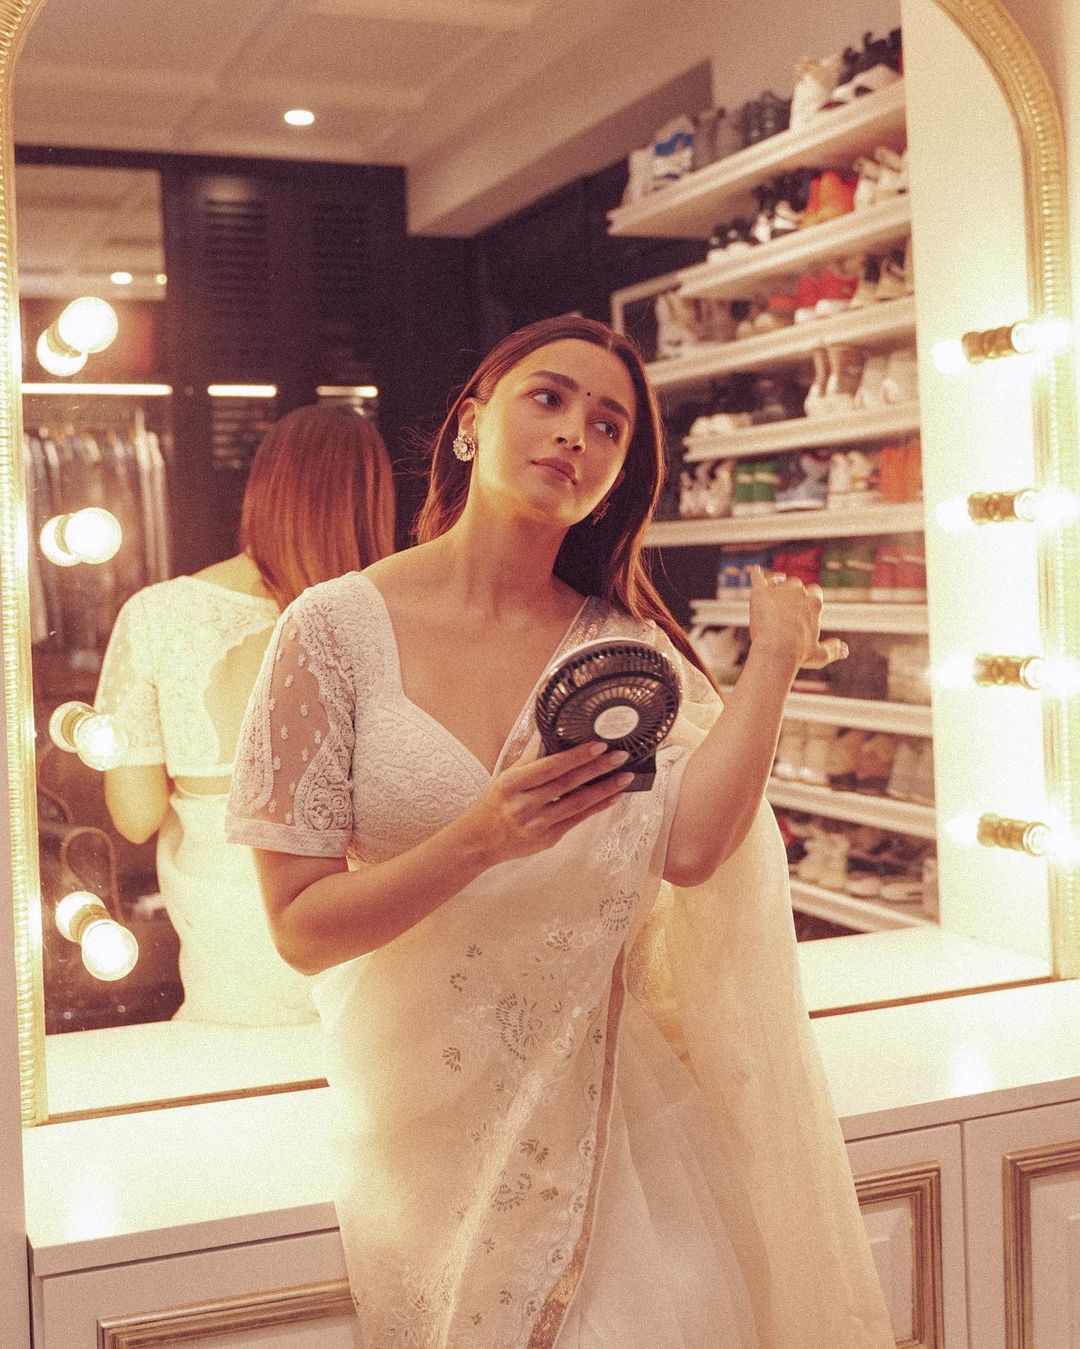  Alia Bhatt looking breathtaking in a gorgeous white sheer saree with minimal makeup and loose hair